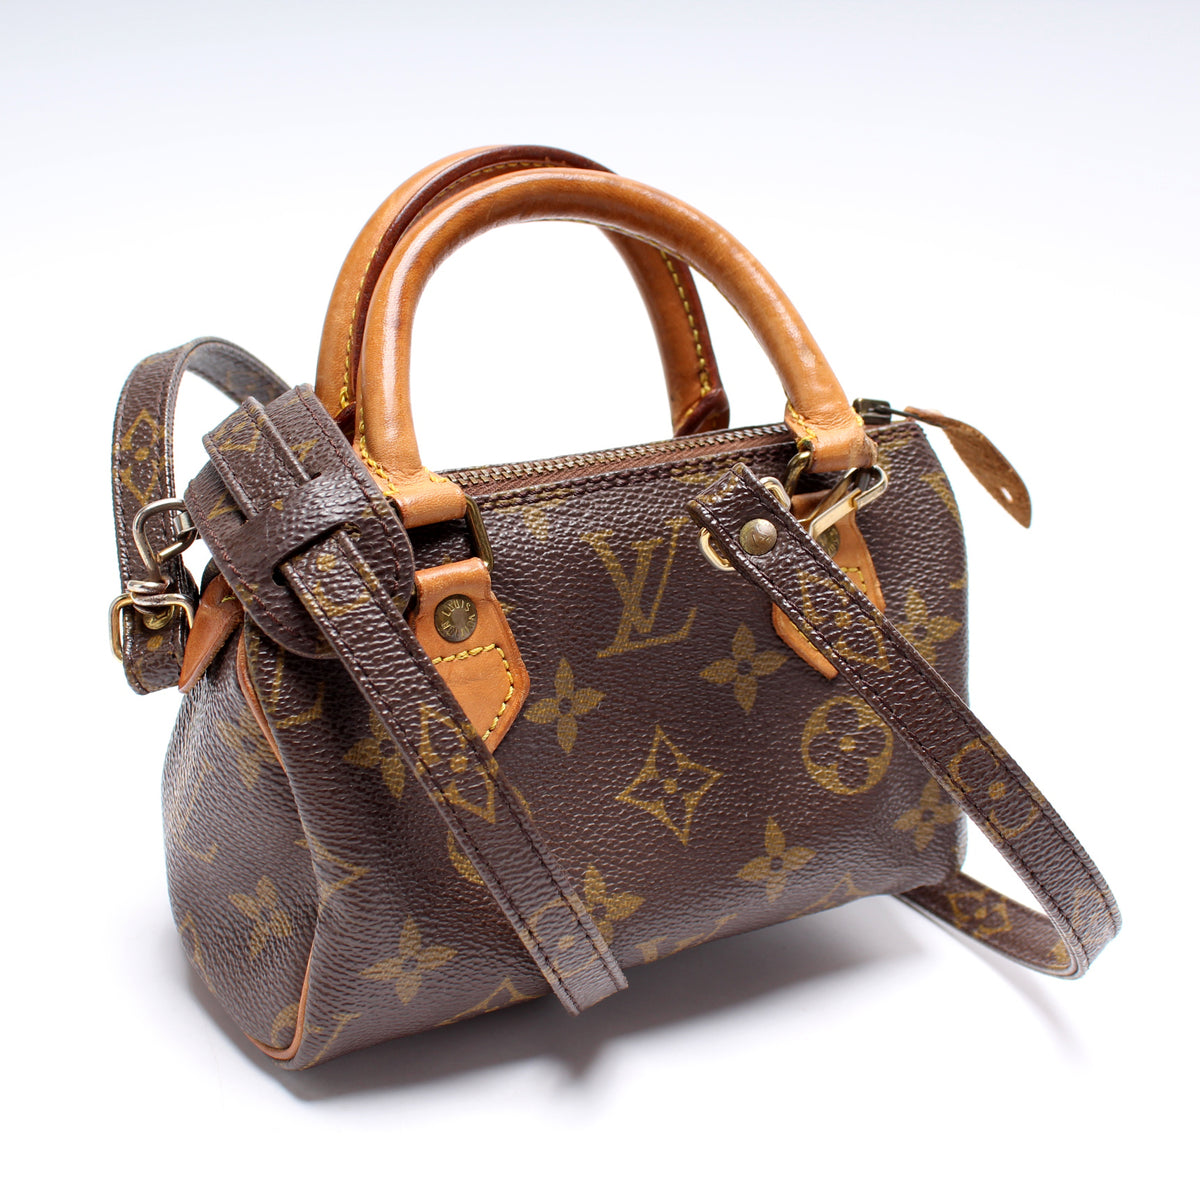 Louis Vuitton - Authenticated Nano Speedy / Mini HL Handbag - Patent Leather Brown For Woman, Very Good condition